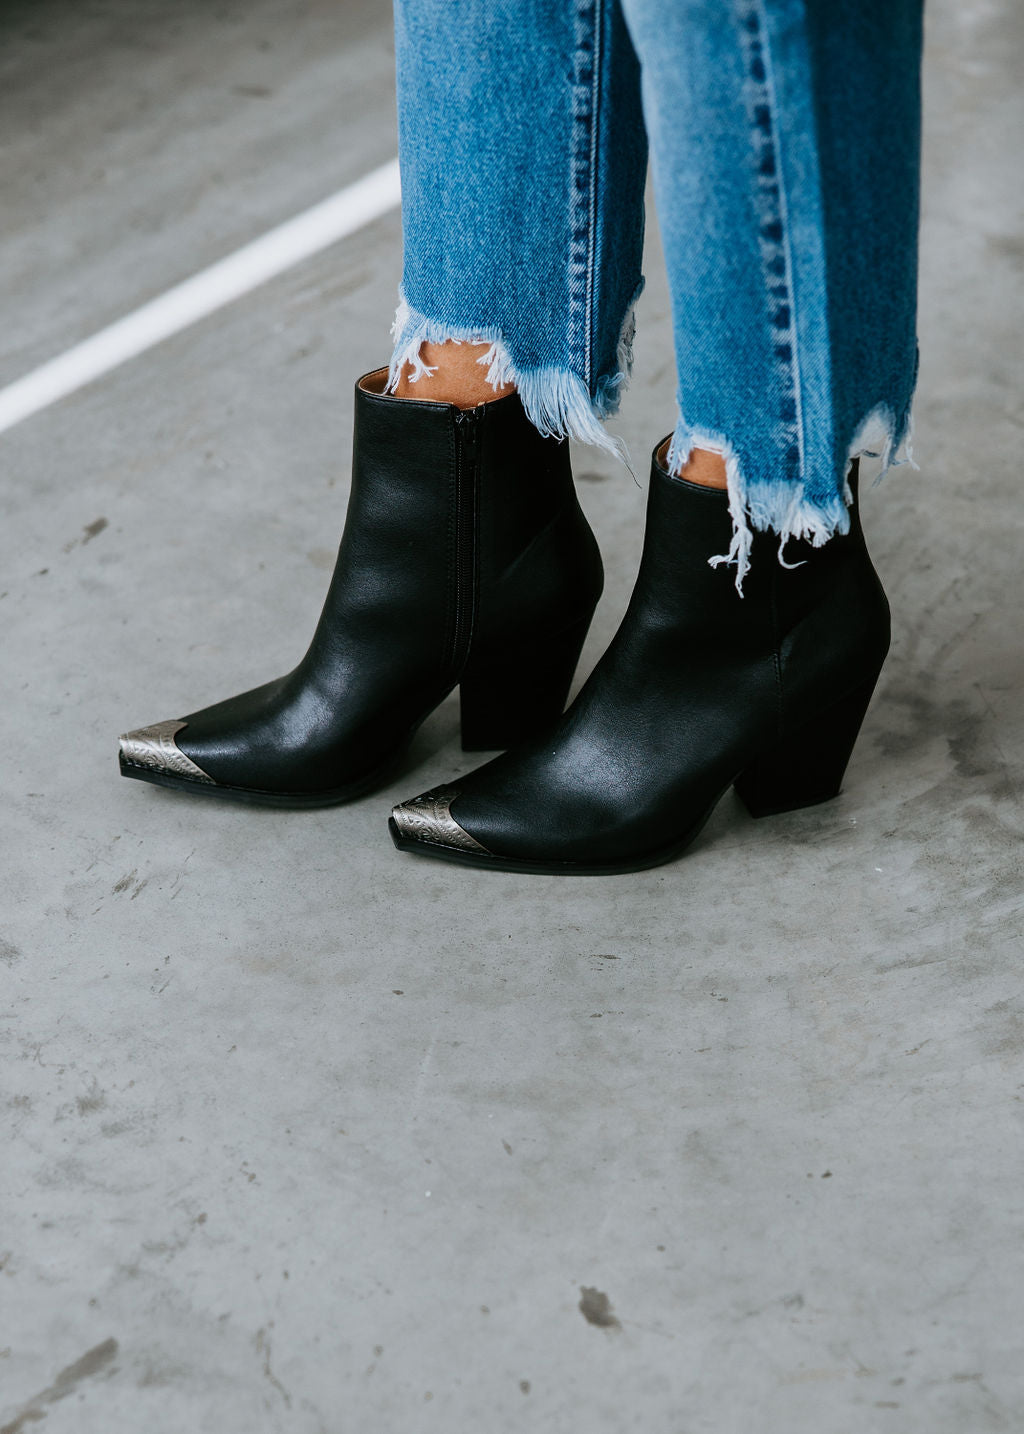 Zion Etched Toe Booties